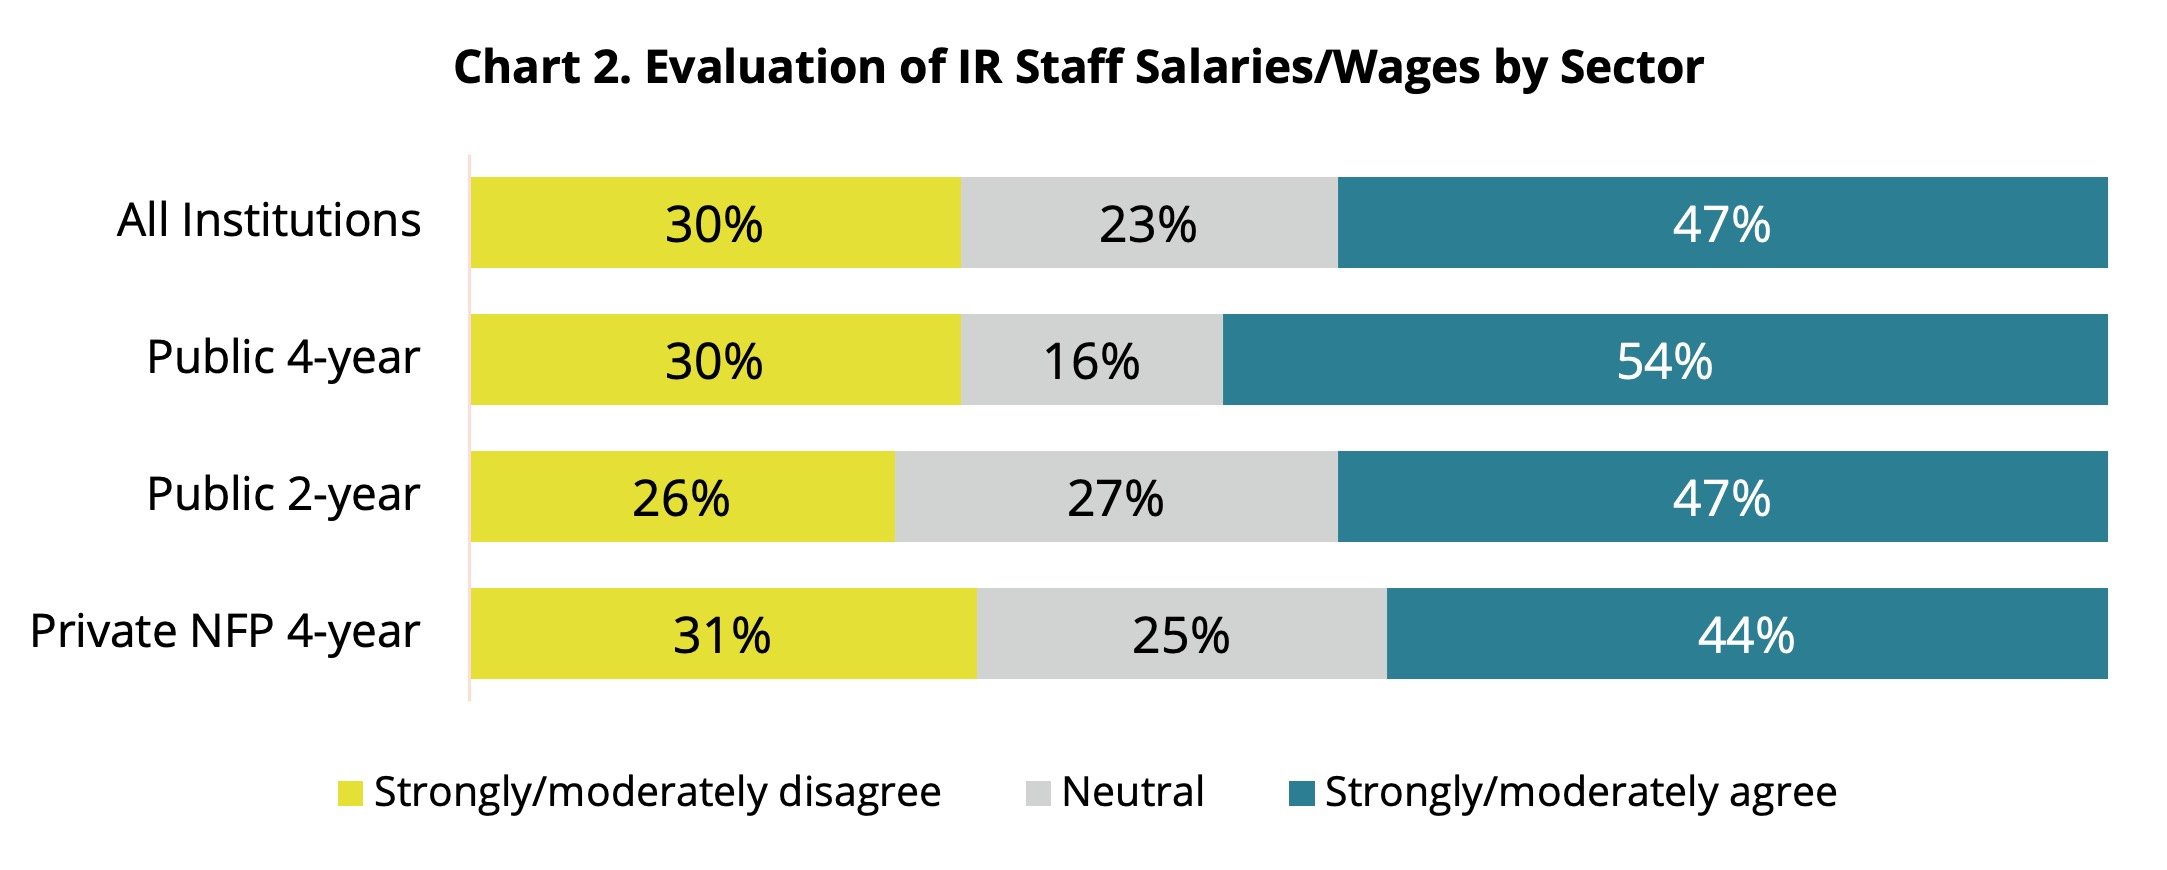 Chart 2. Evaluation of IR Staff Salaries/Wages by Sector
